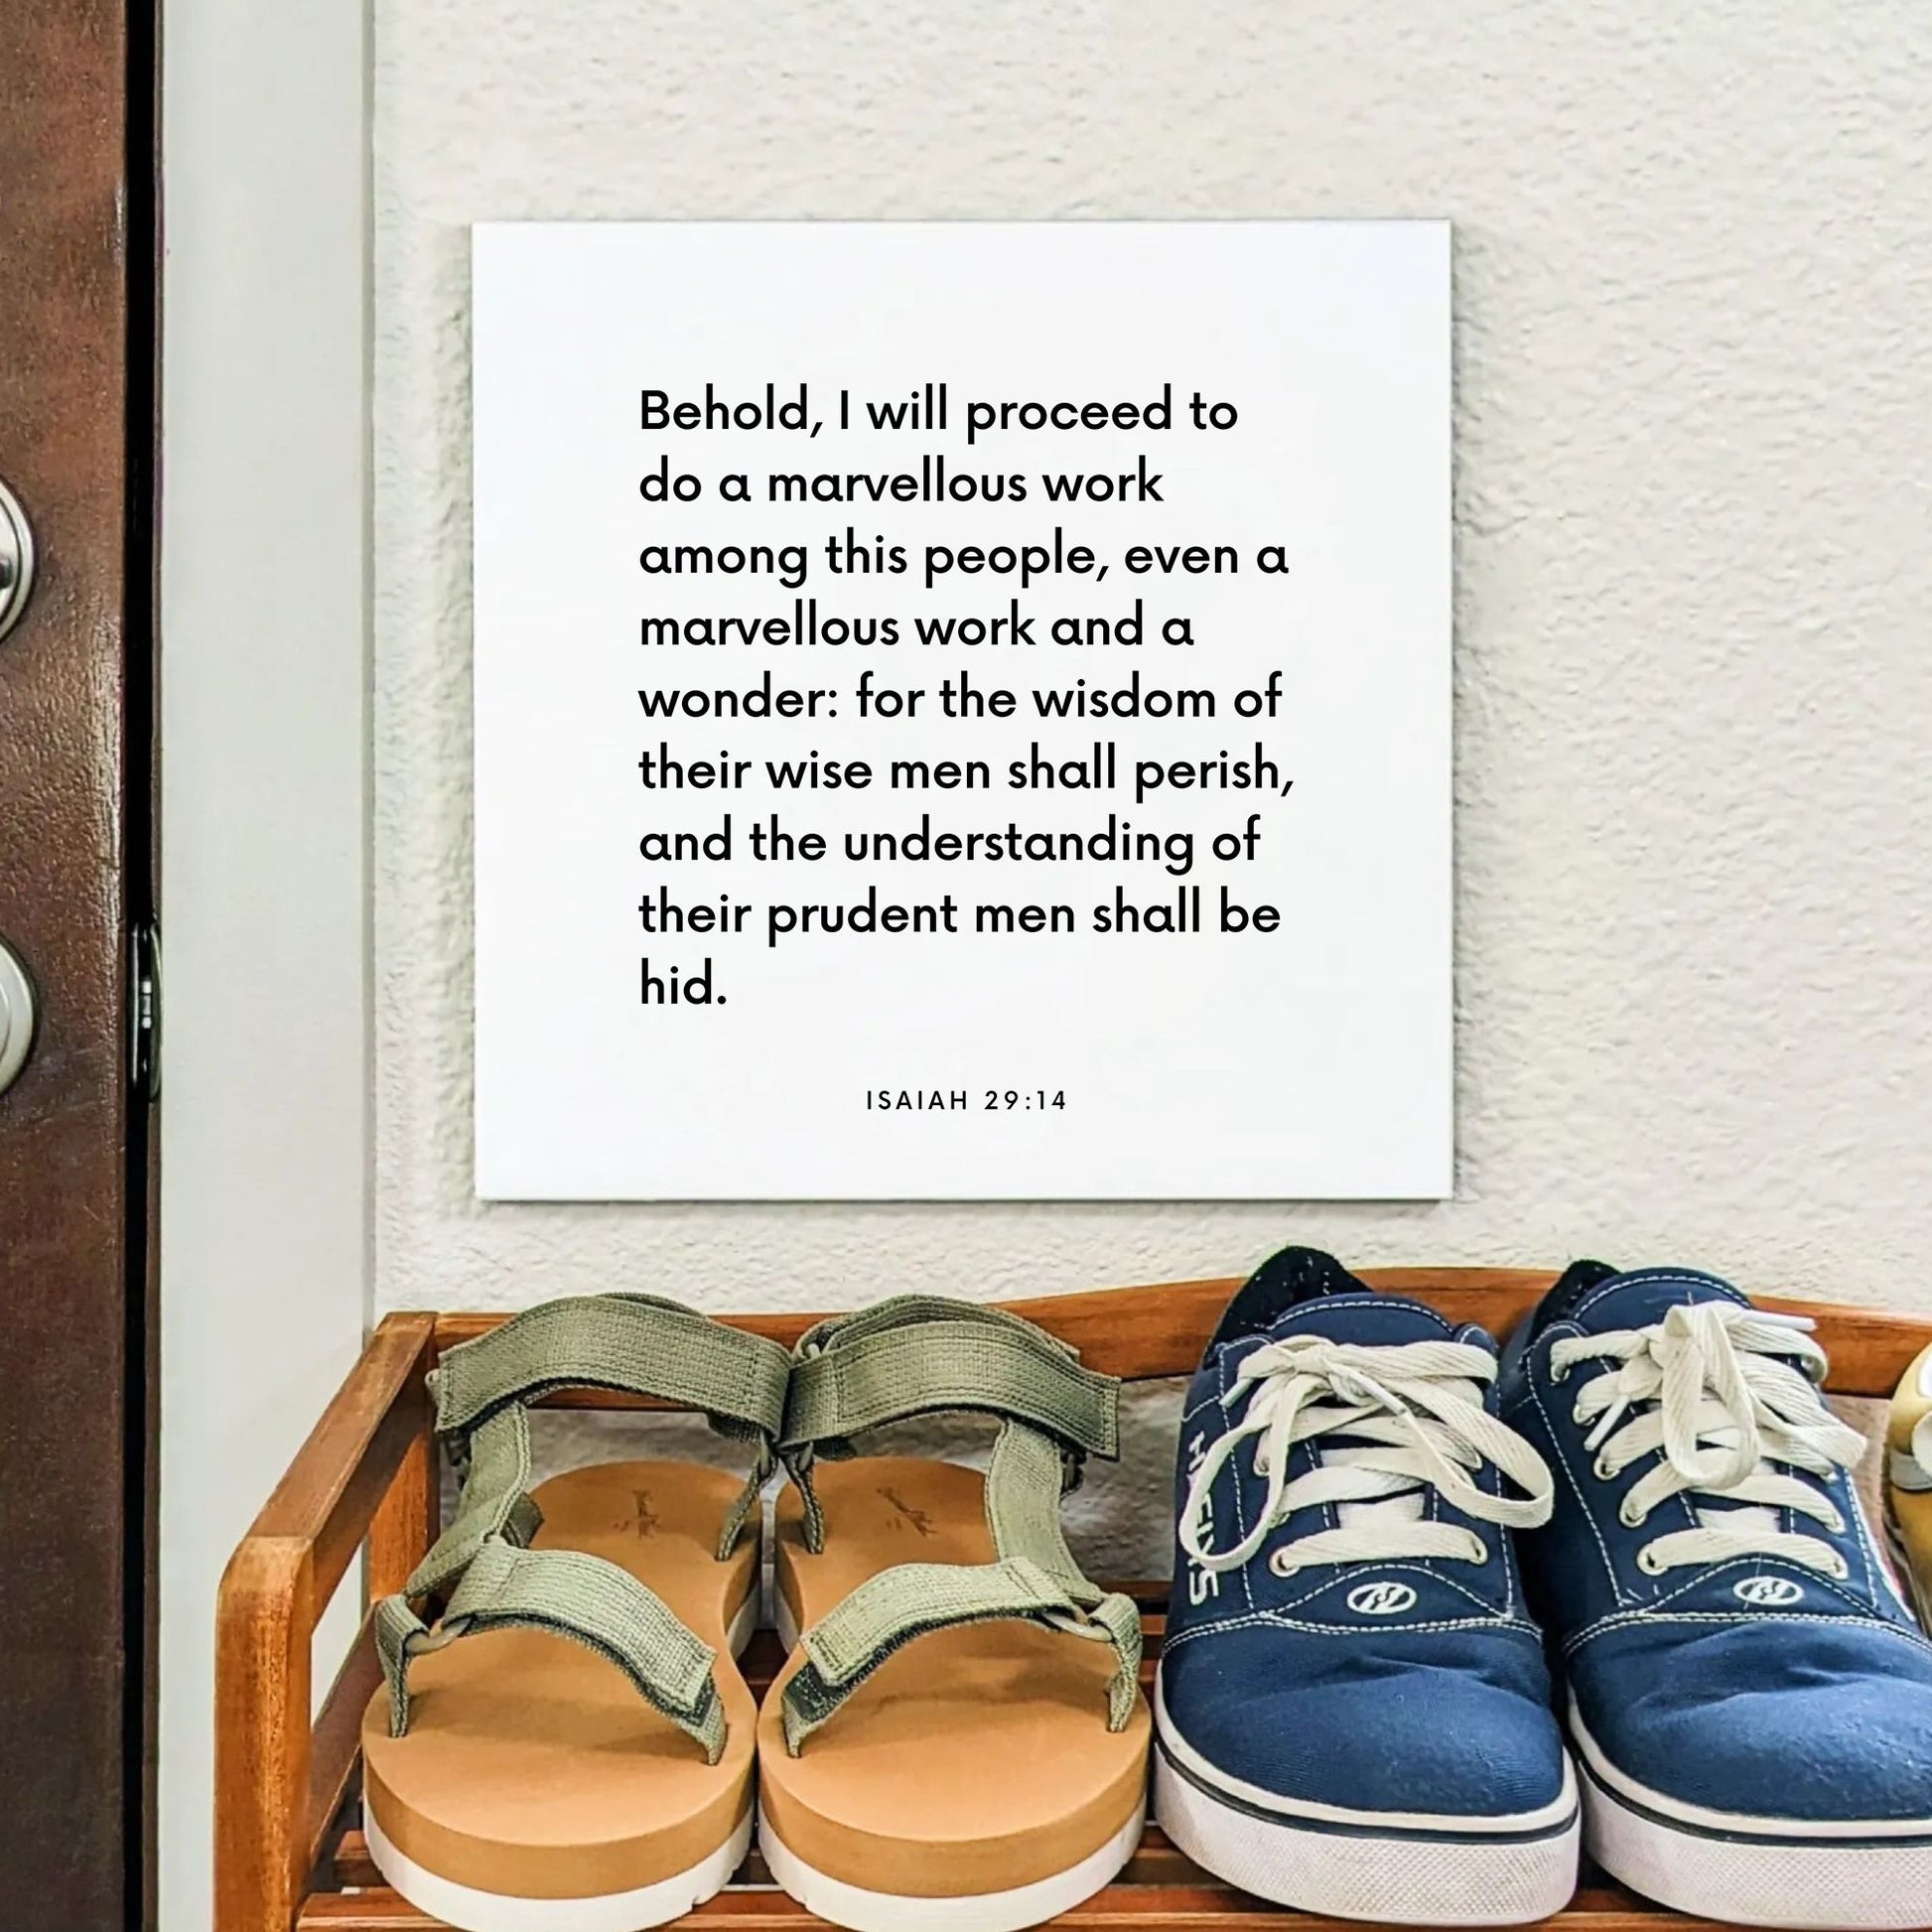 Shoes mouting of the scripture tile for Isaiah 29:14 - "I will do a marvellous work and a wonder"